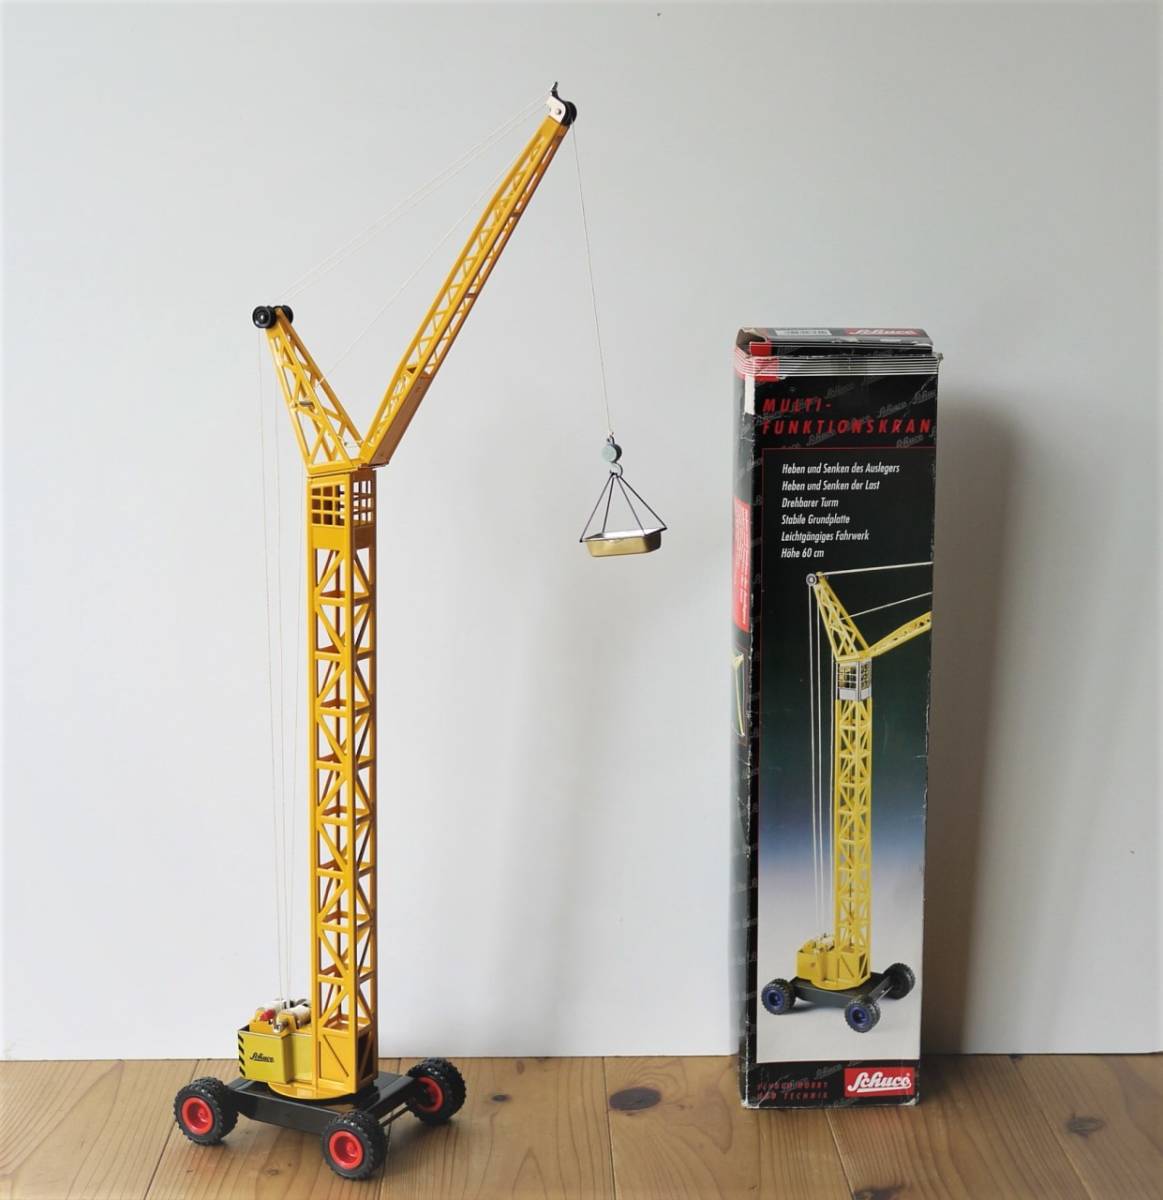 shukoSchuco tower crane model MULTI-FUNKTIONSKRAN tin plate toy Mini construction heavy equipment ... car Germany toy 60. box attaching steel made model 